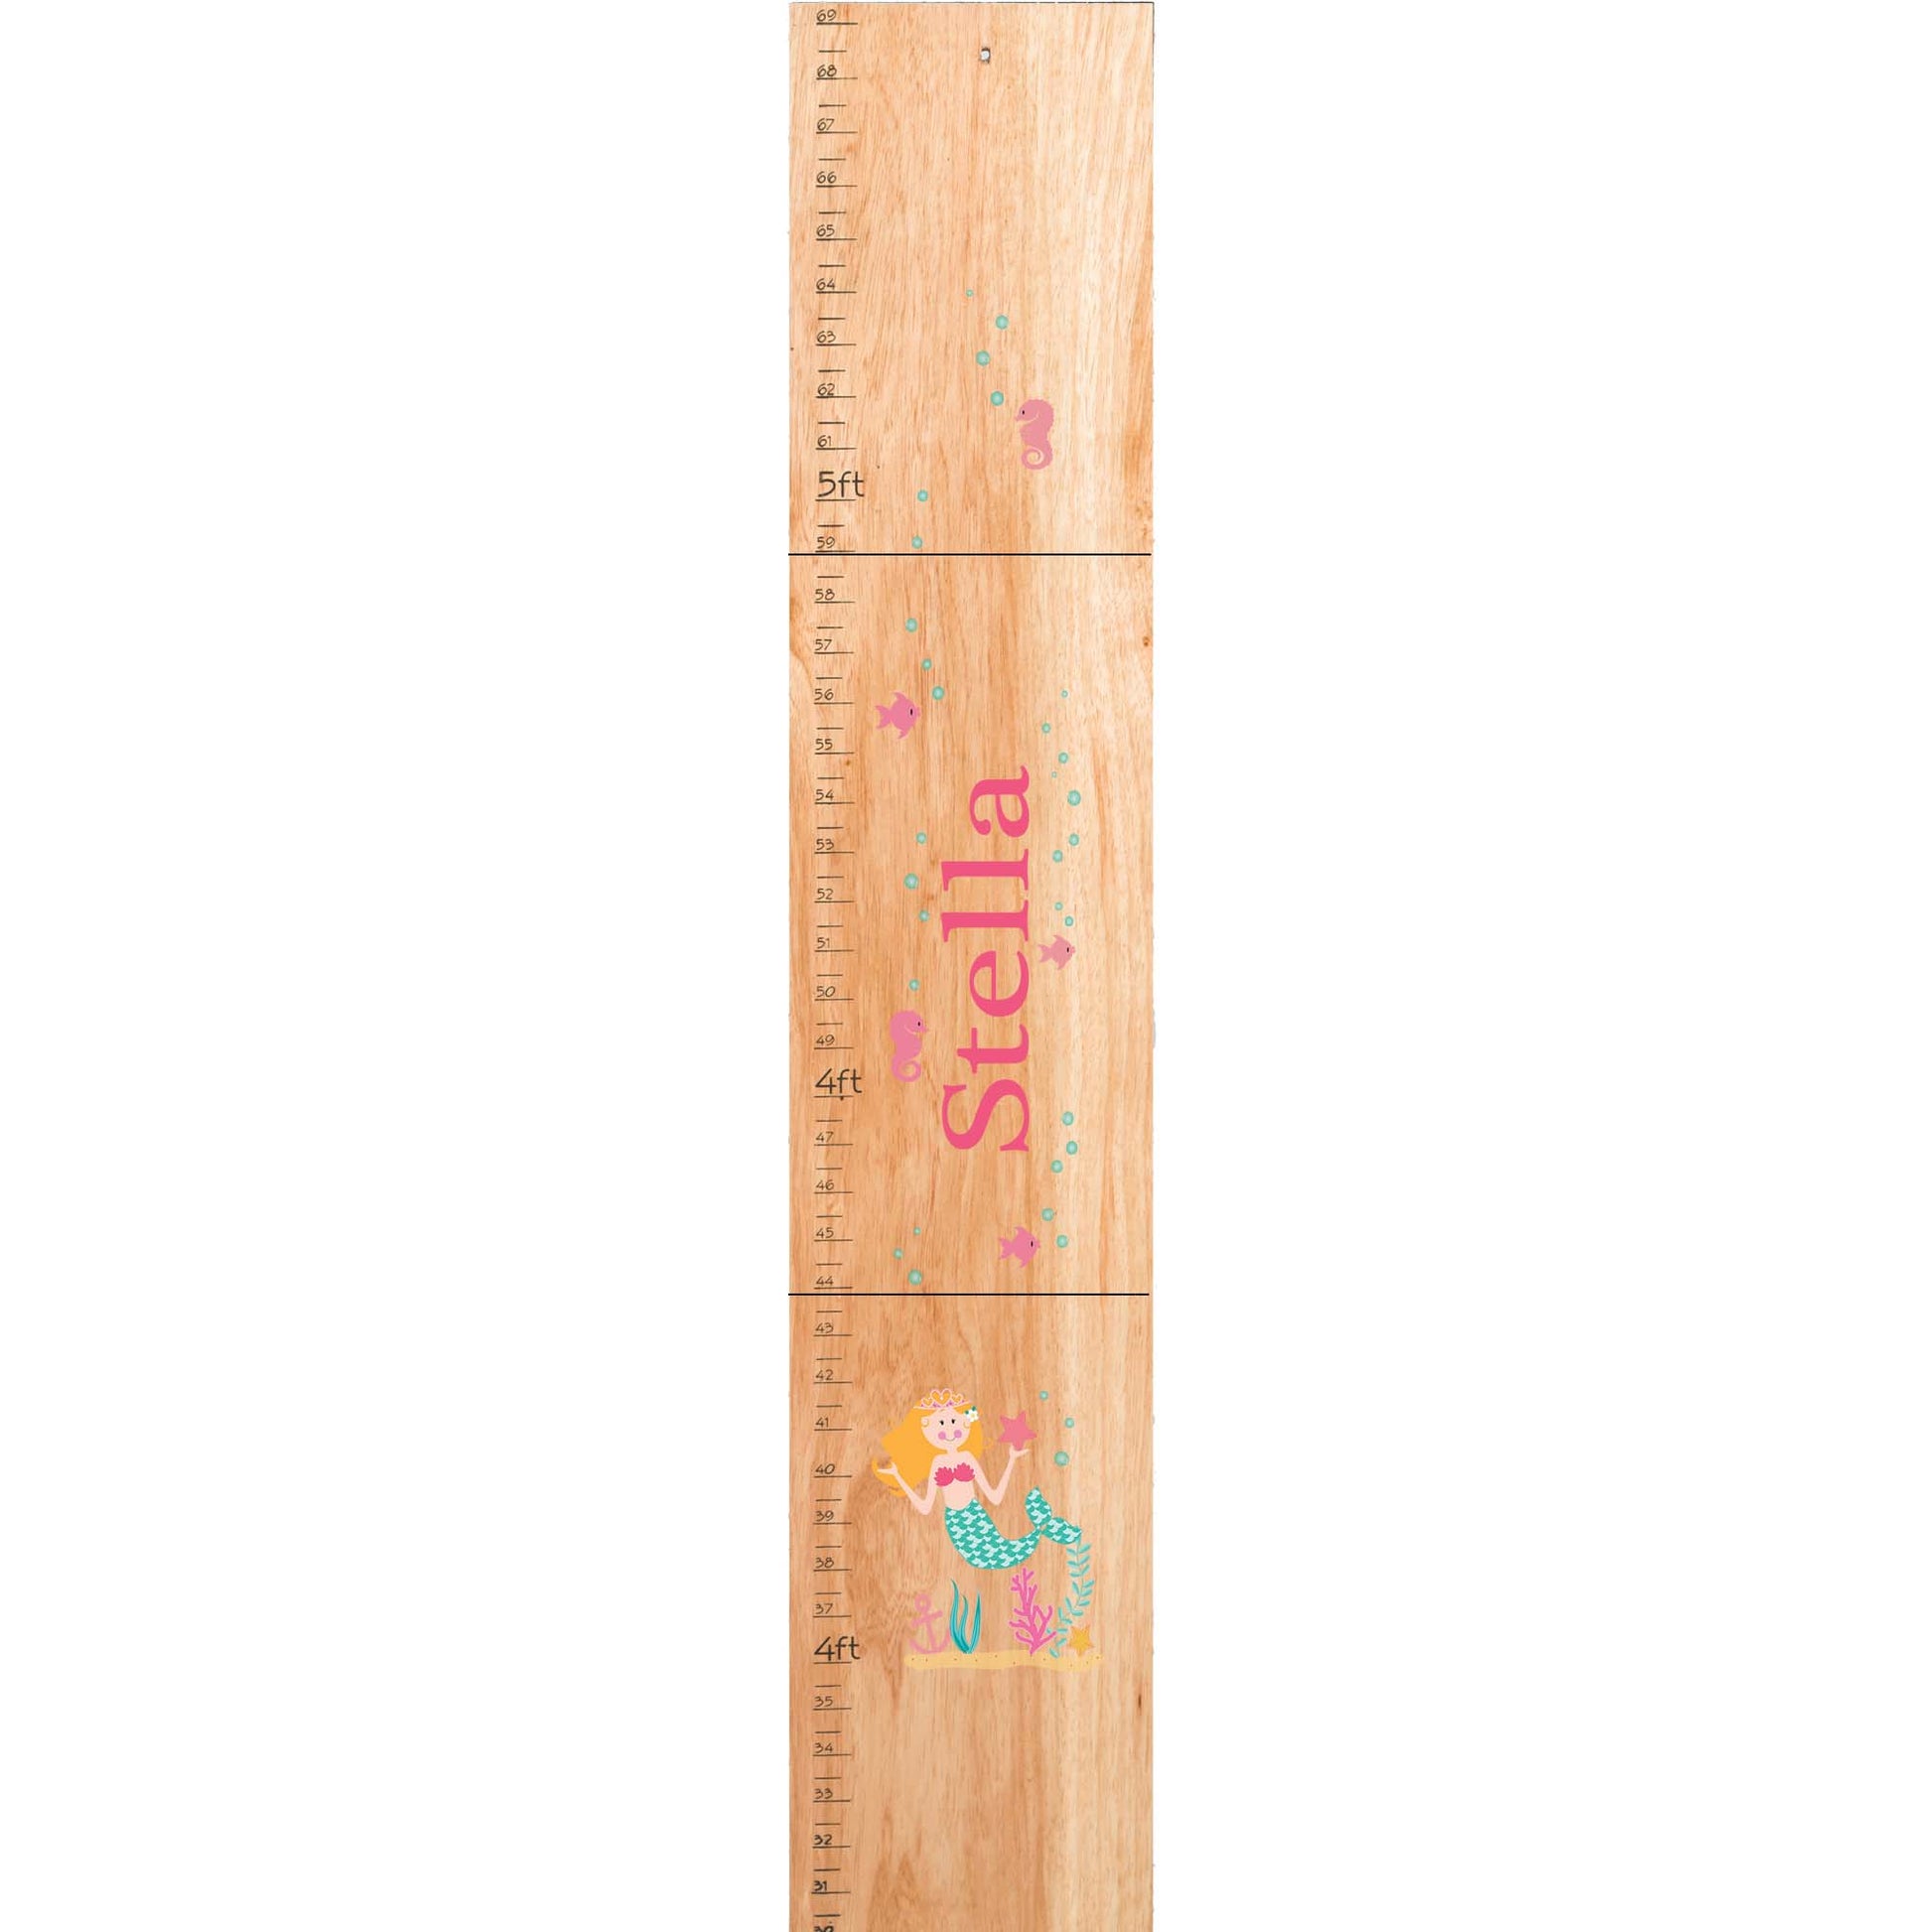 Personalized Natural Growth Chart With Mermaid Blonde Design